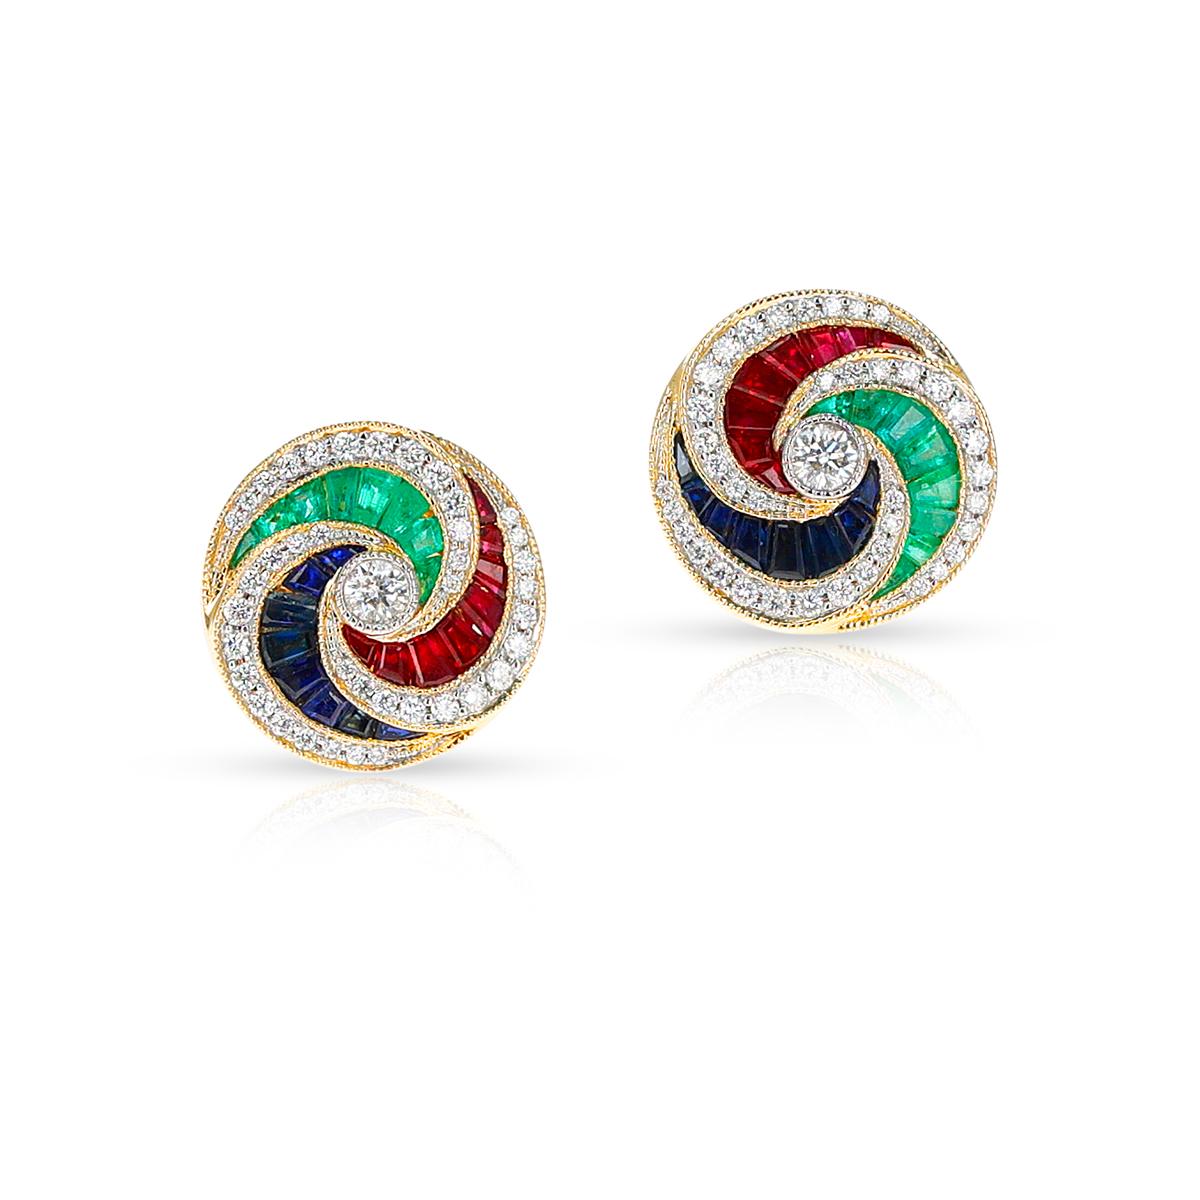 Round Cut Ruby, Emerald, Sapphire and Diamond Pinwheel Earrings, 18k For Sale